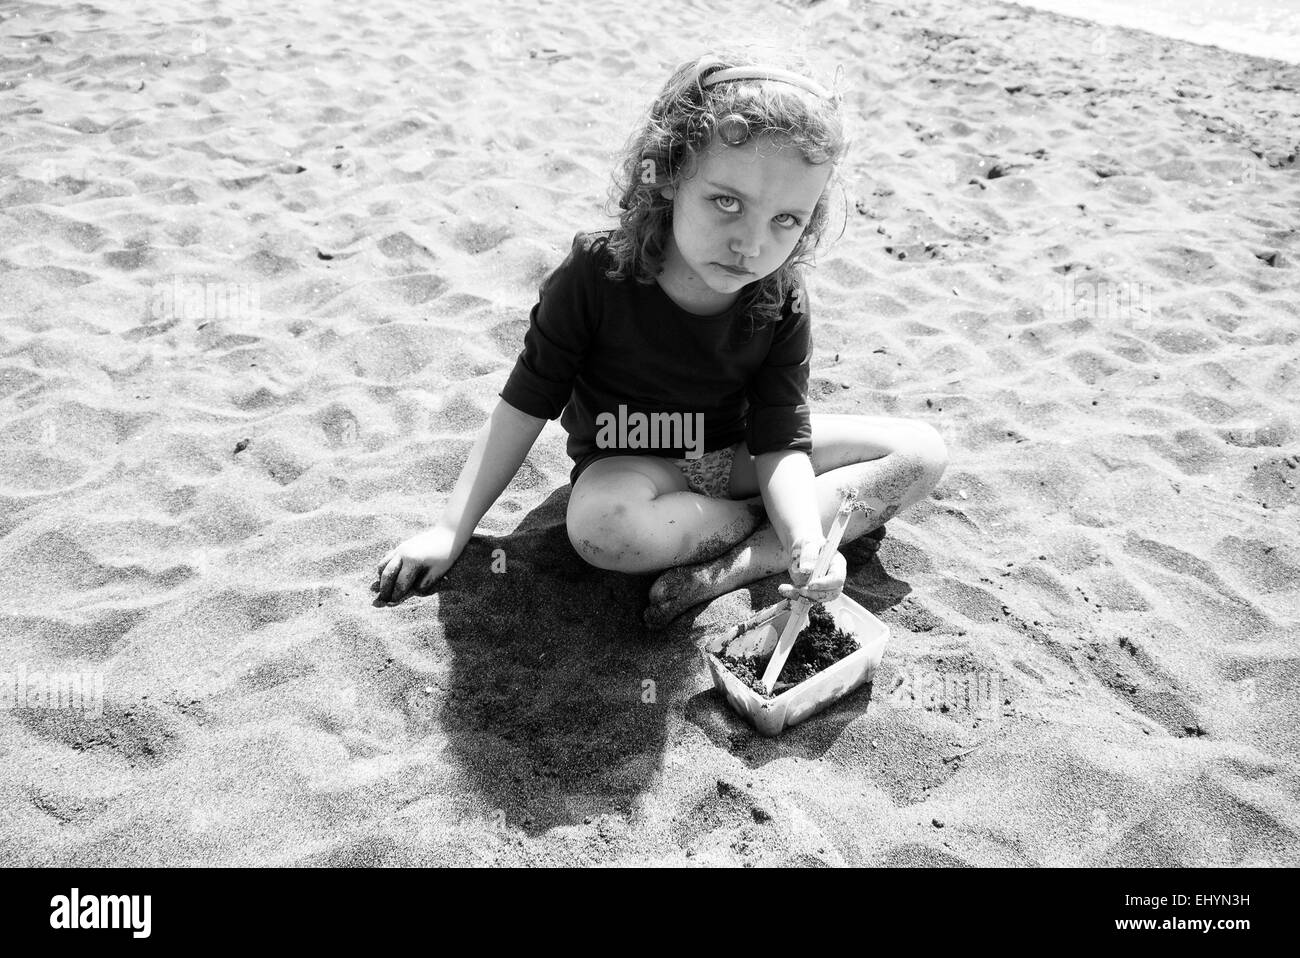 Sad looking girl sitting on the beach playing with sand, Italy Stock Photo